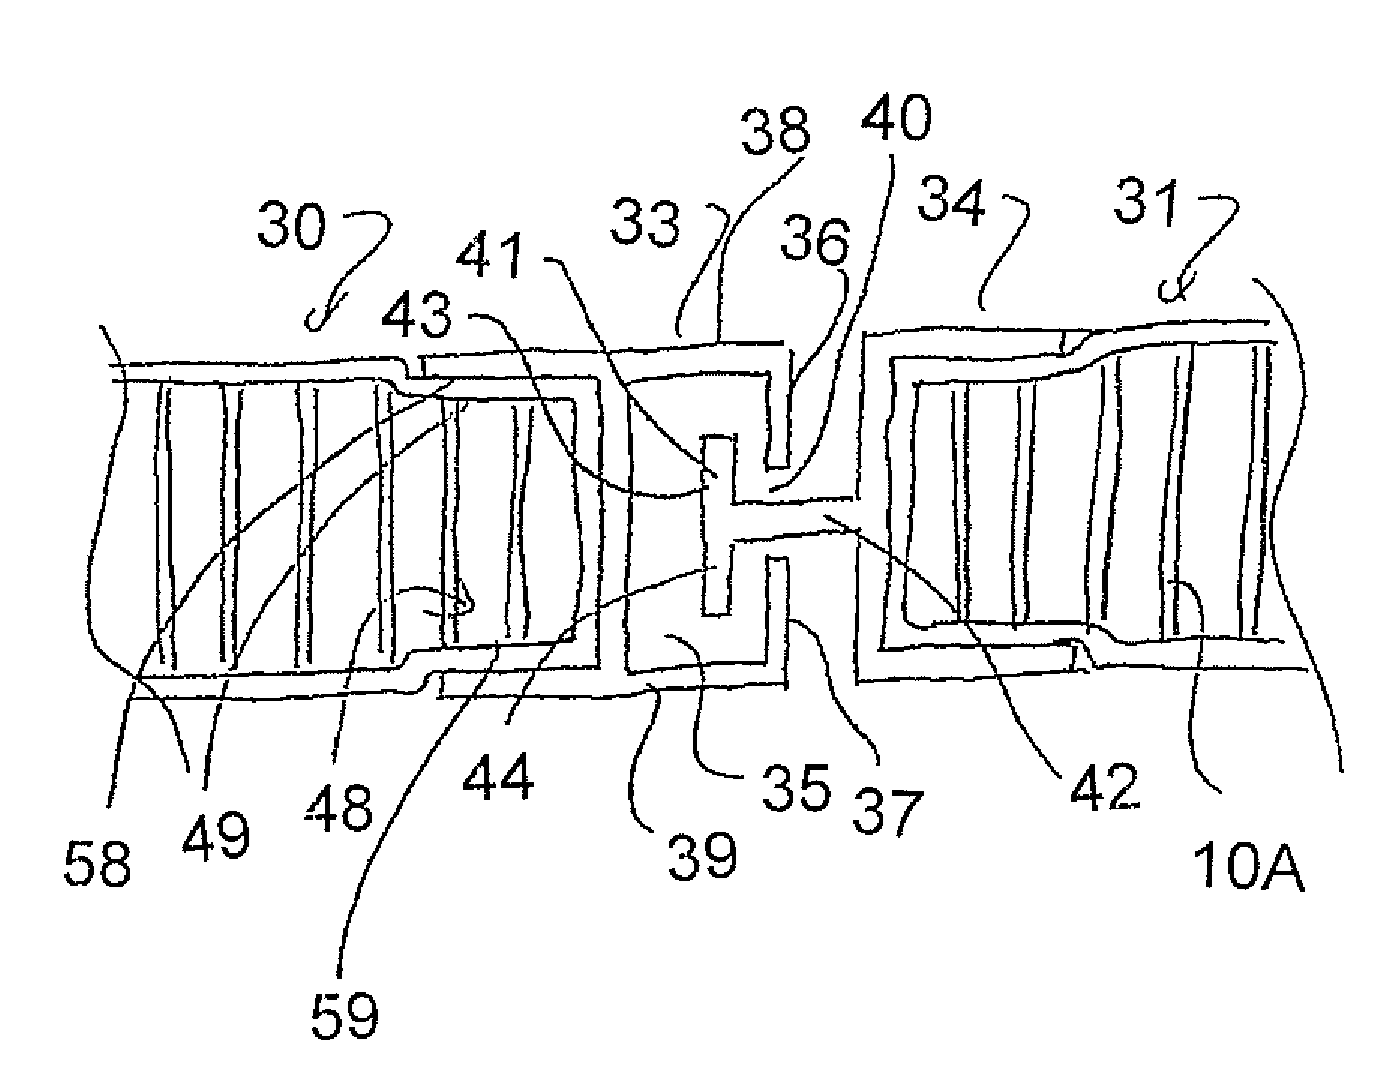 Rig mat system using panels of composite material